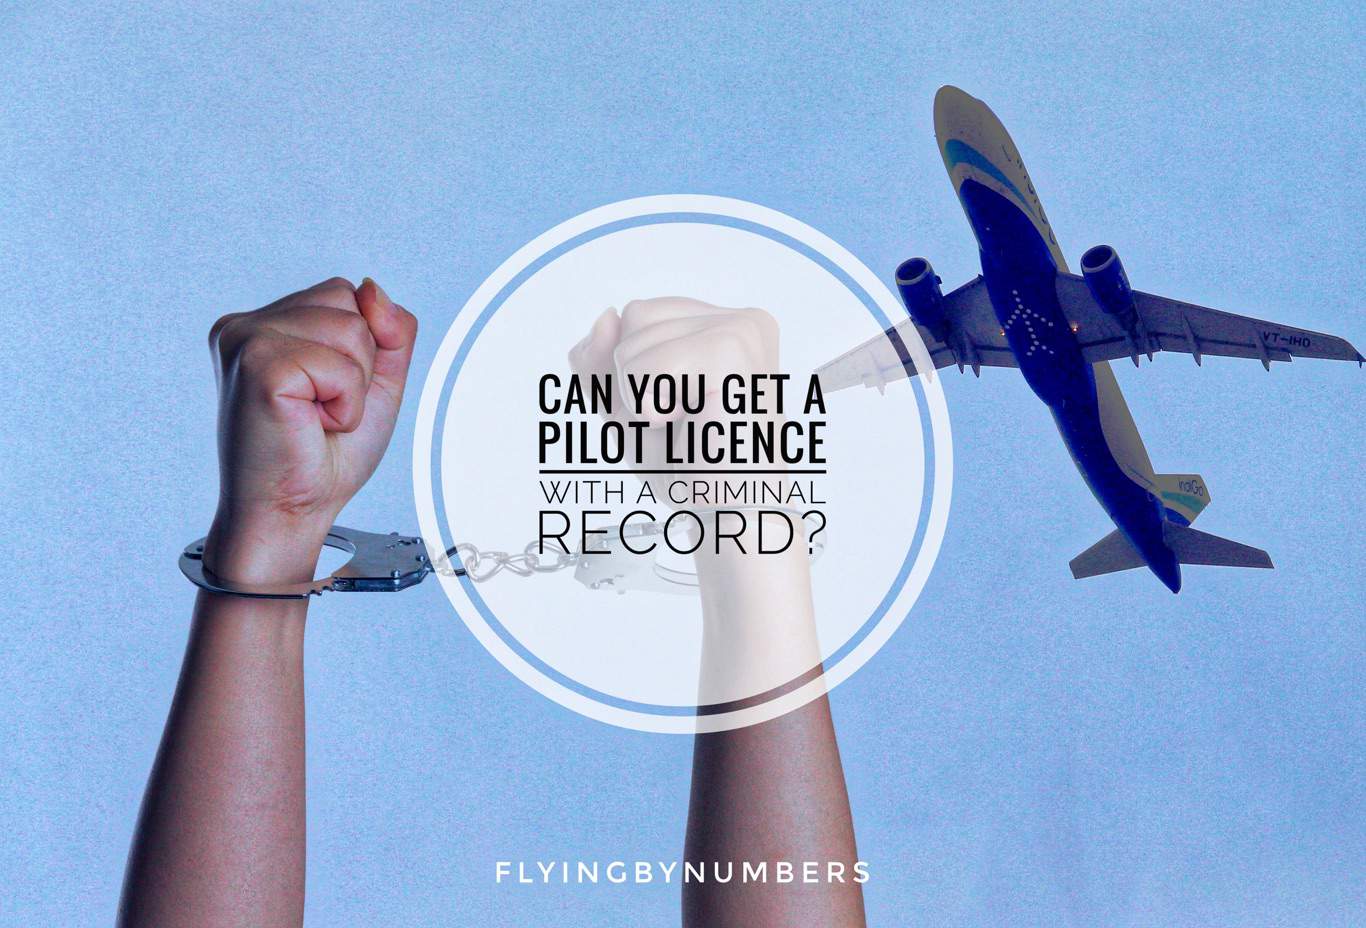 Can you get a pilot licence with a criminal record in the UK?